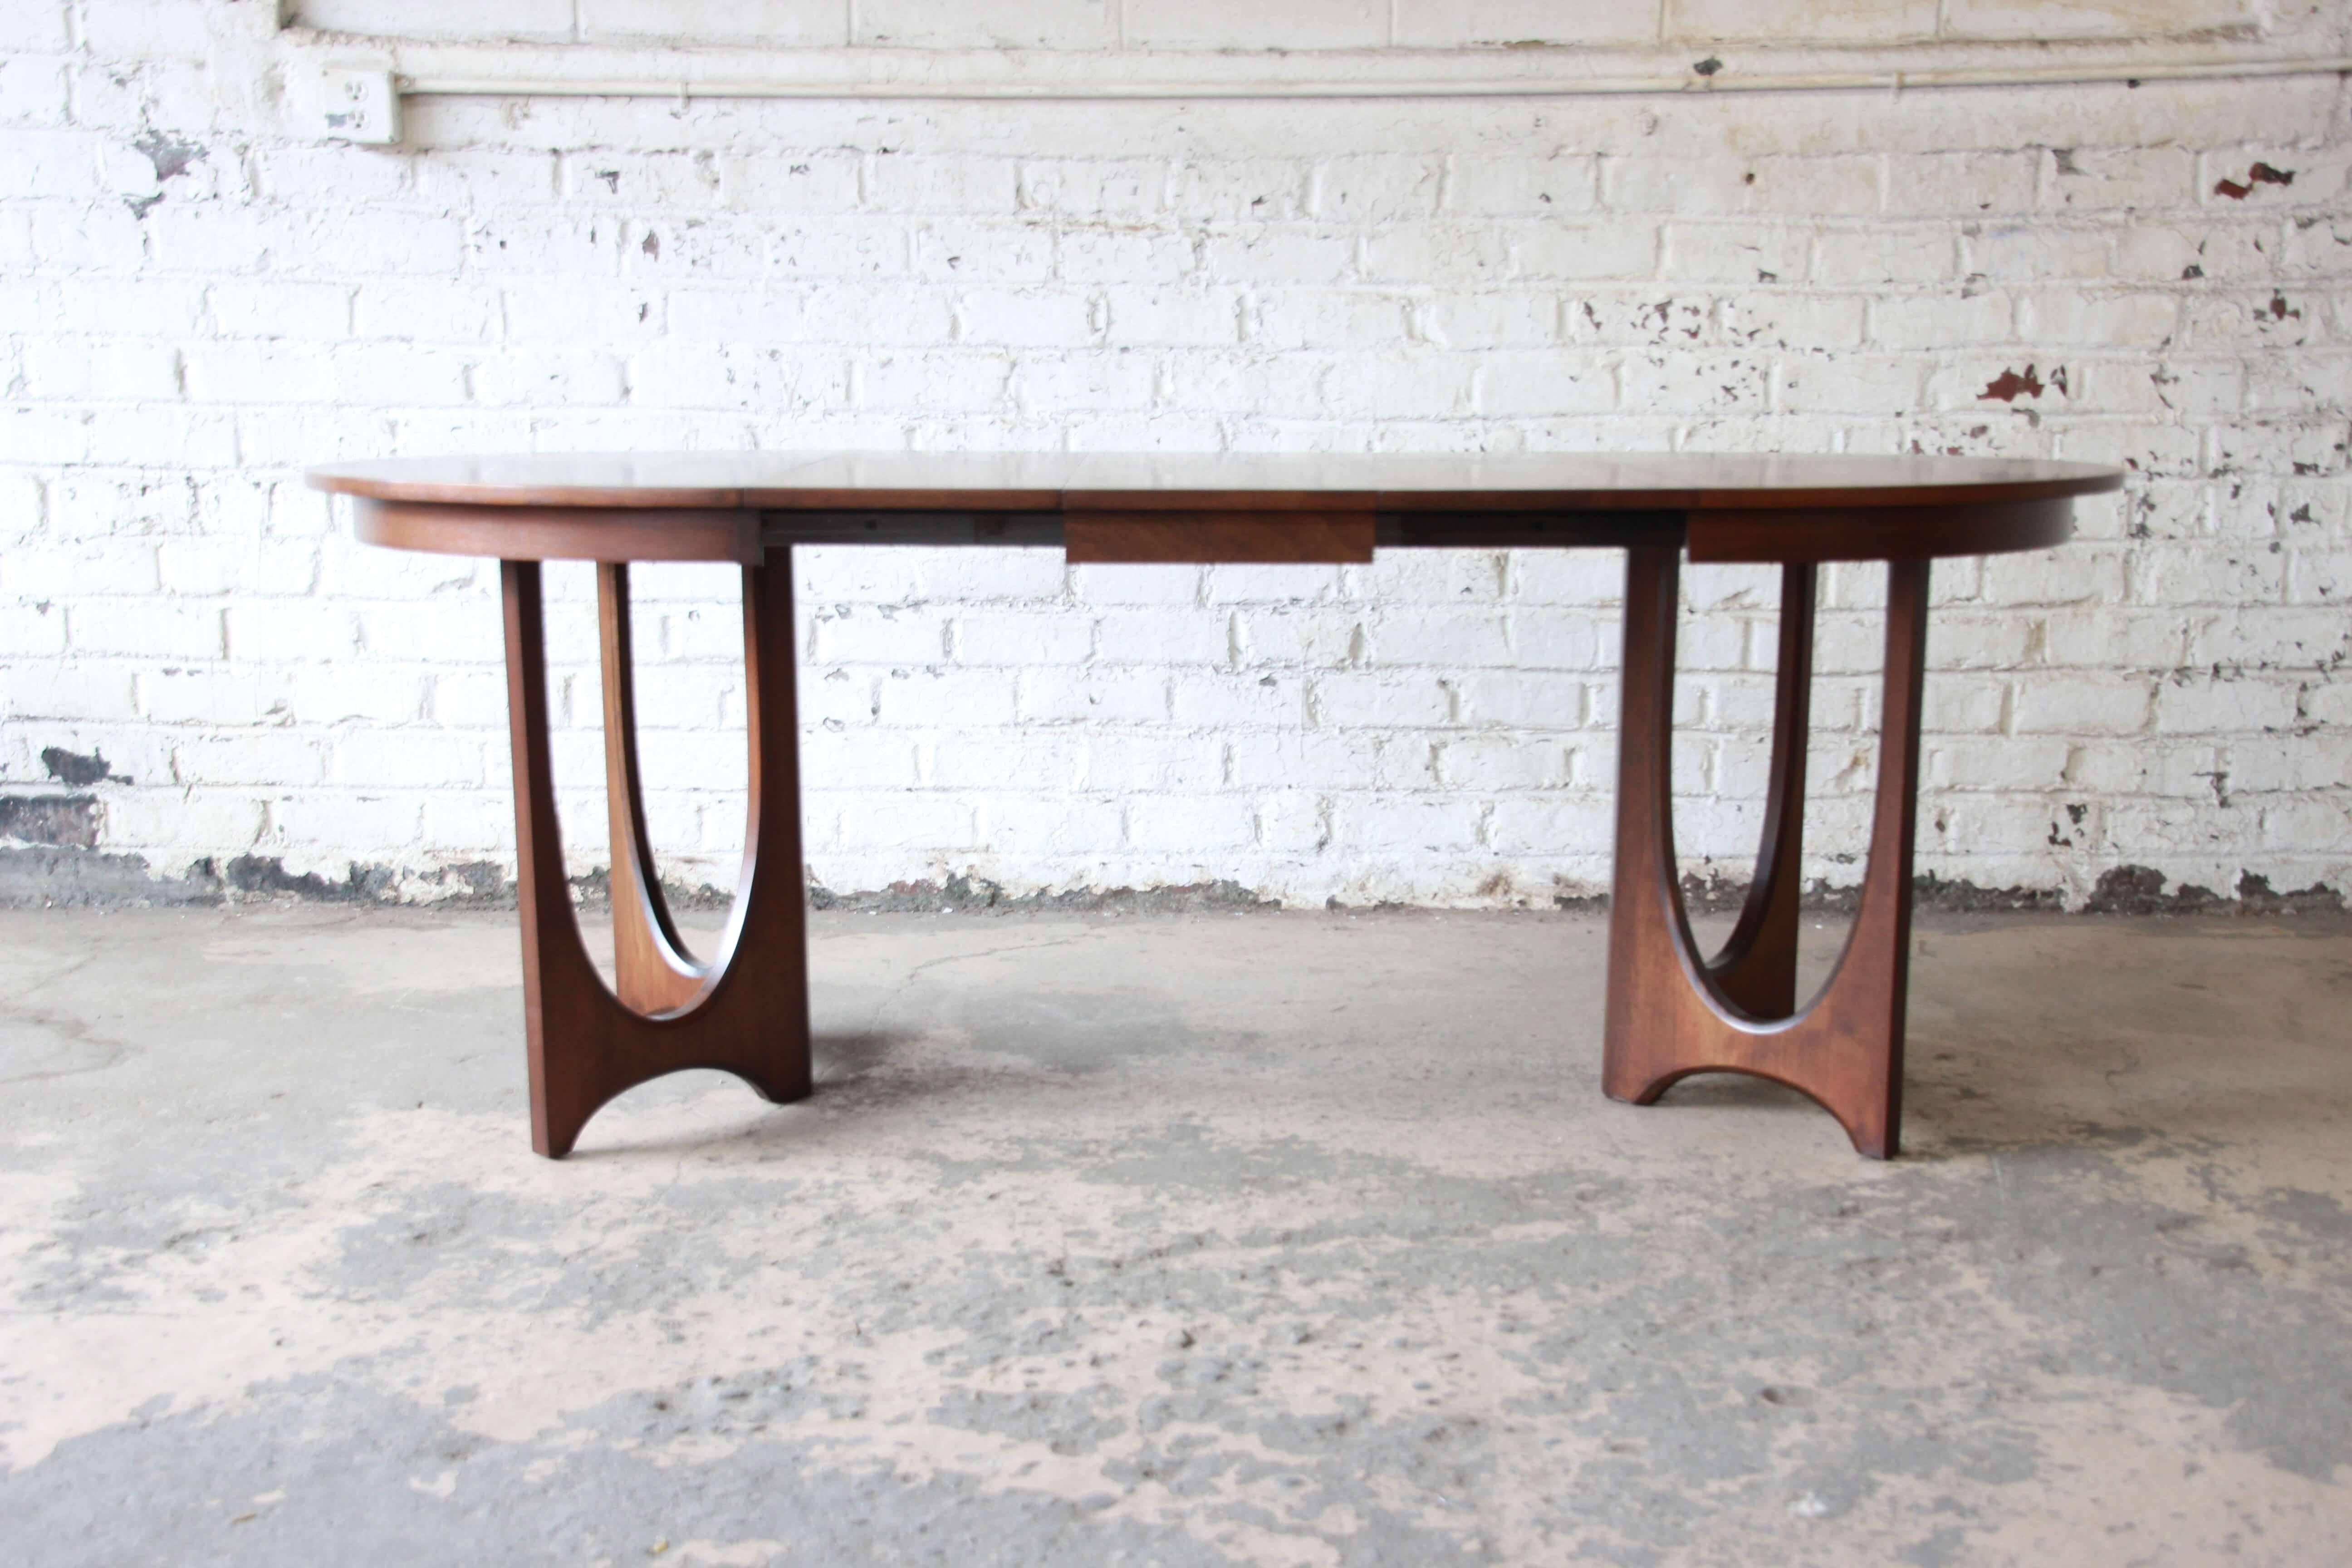 Offering a rare and amazing Broyhill Brasilia sculpted walnut dinging table. It sits on two sculpted arch bases. As a round table it makes a comfortable table for a small eating area or apartment. The table includes three leaves (12